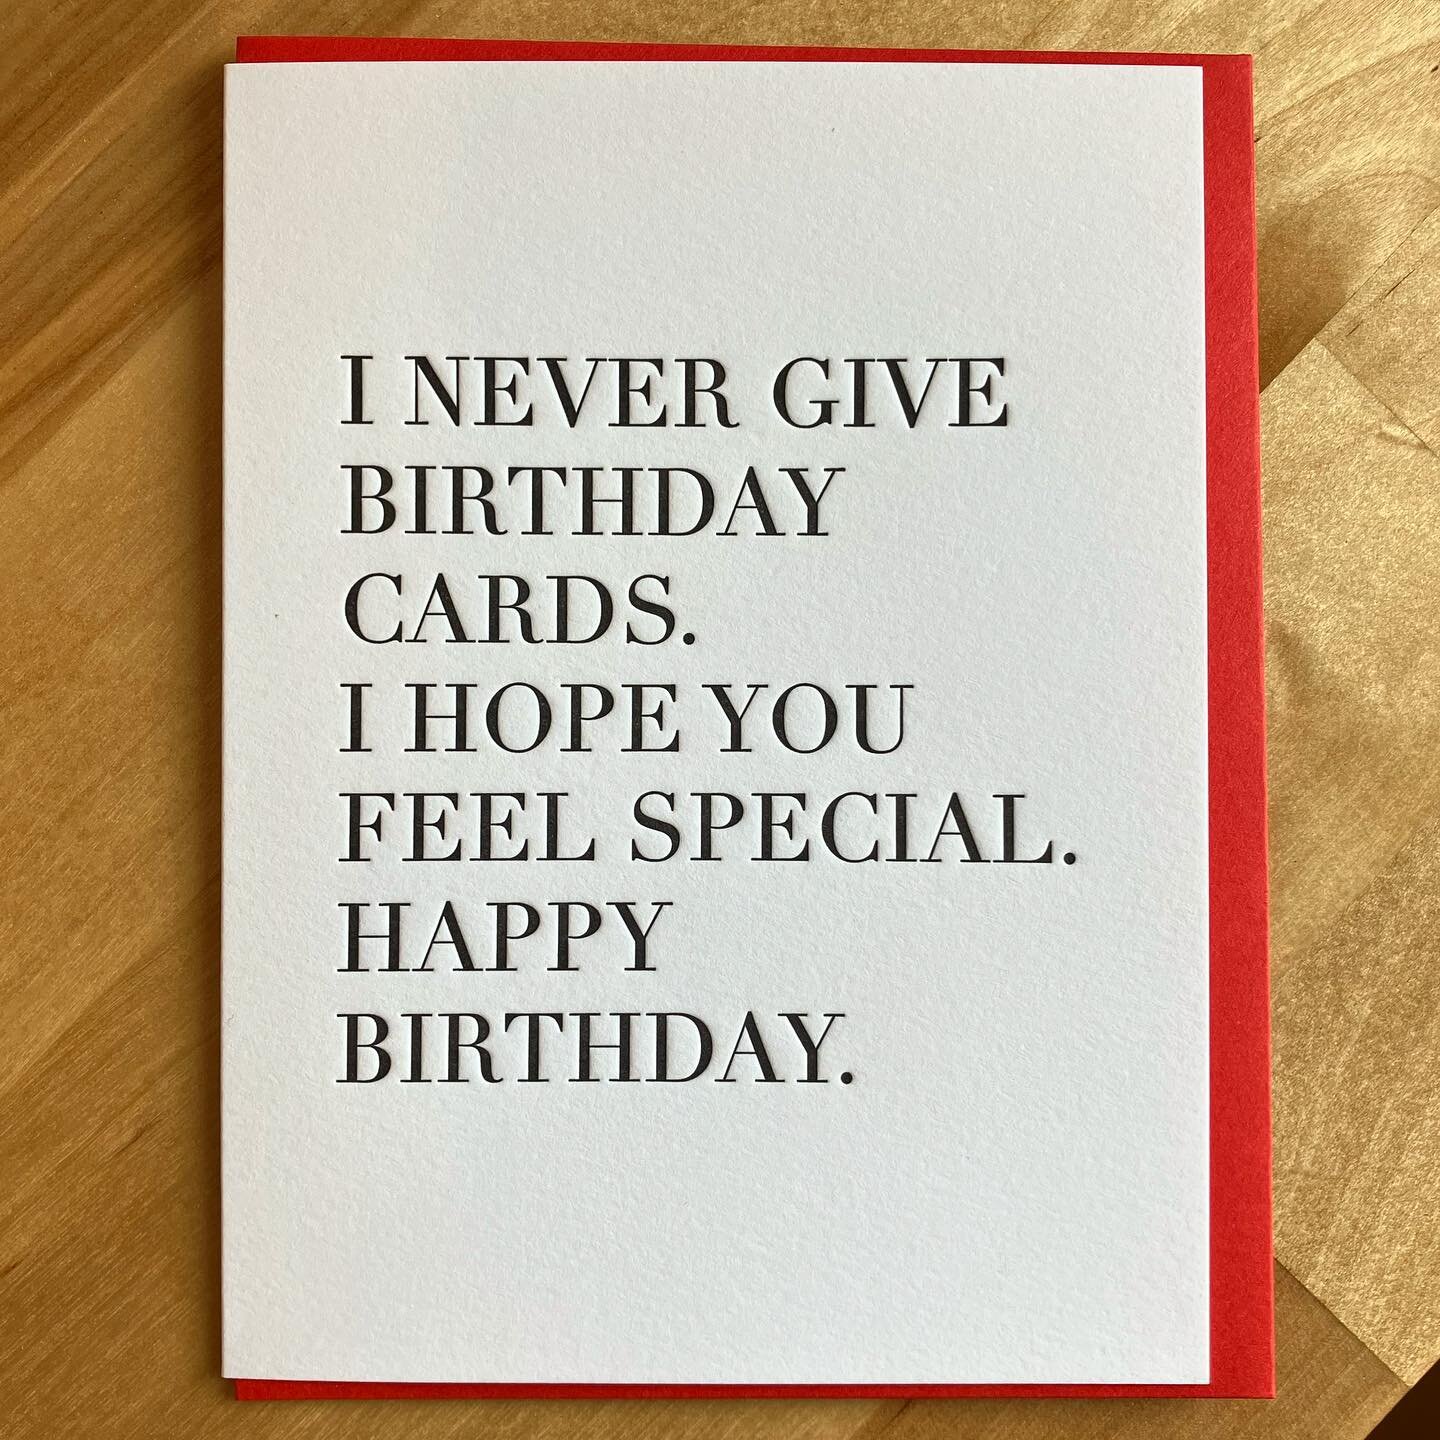 It&rsquo;s great to get some snail mail that isn&rsquo;t just bills and junk mail. It&rsquo;s never too late to get started!
.
.
.
.
#letterpress #birthday #happybirthday #paper #handmade #print #letterpresslove #snailmail #madeinny #madeinusa